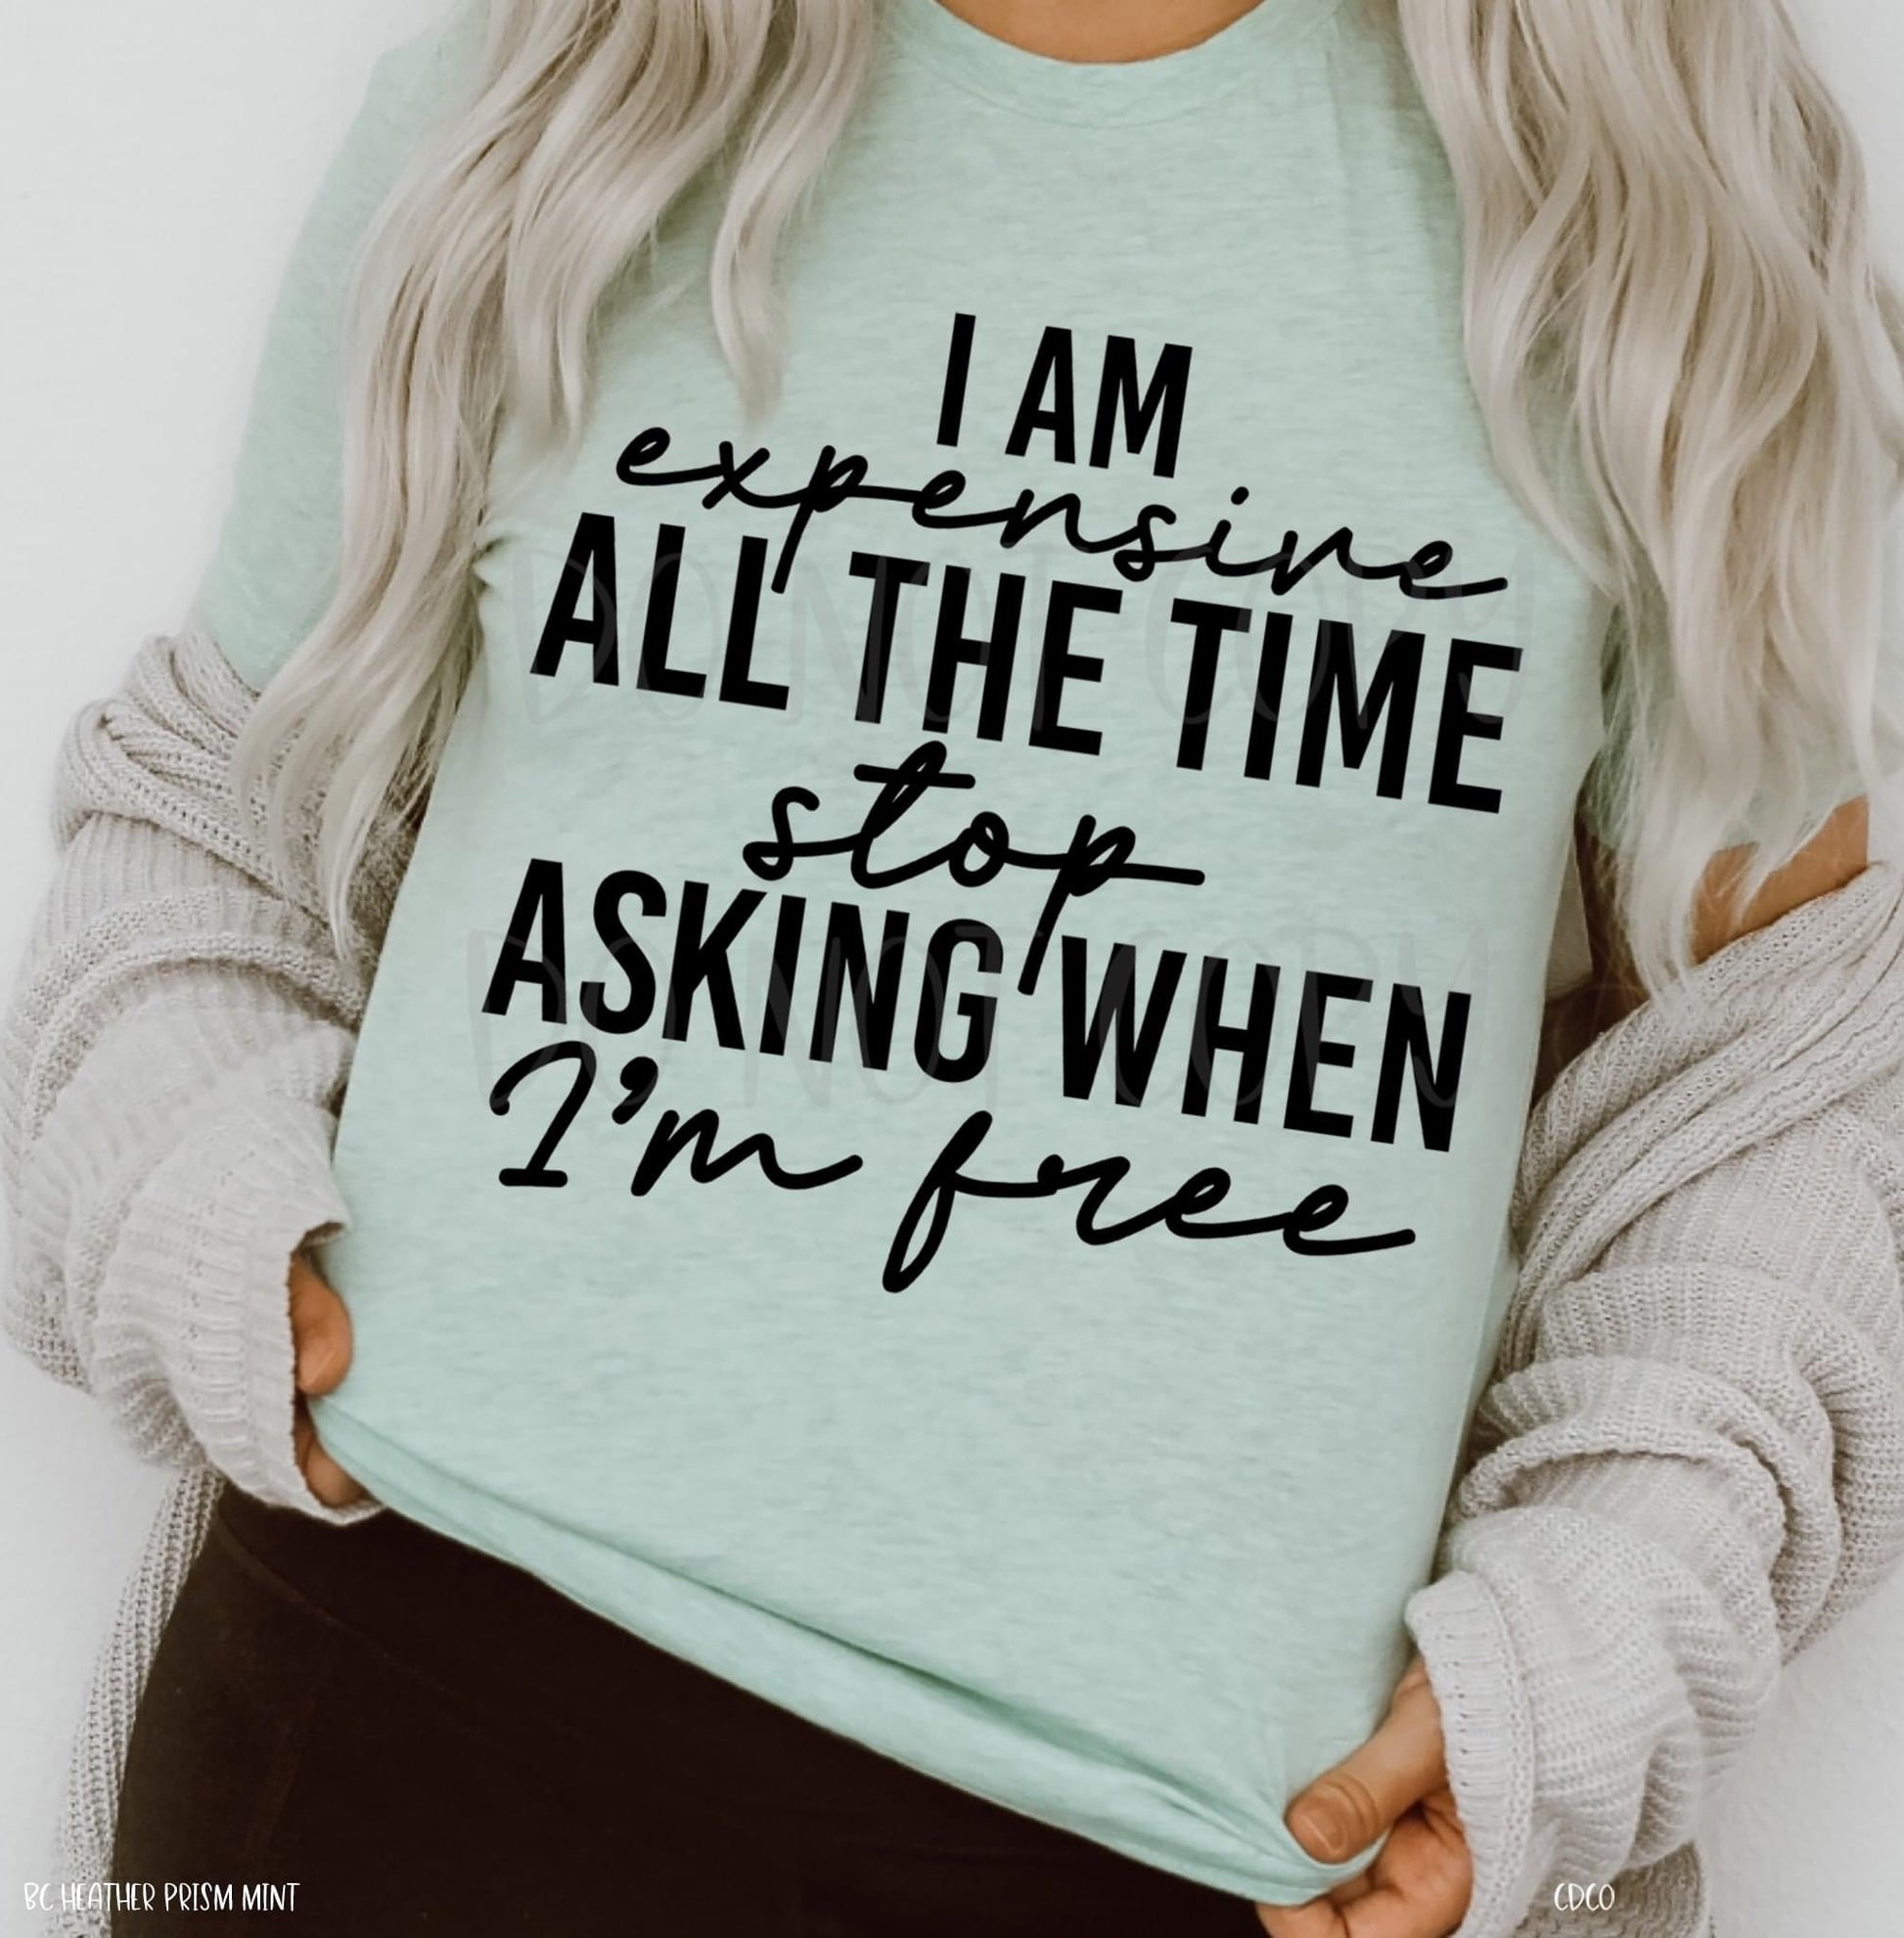 I'm expensive all the time stop asking when I'm free!!!